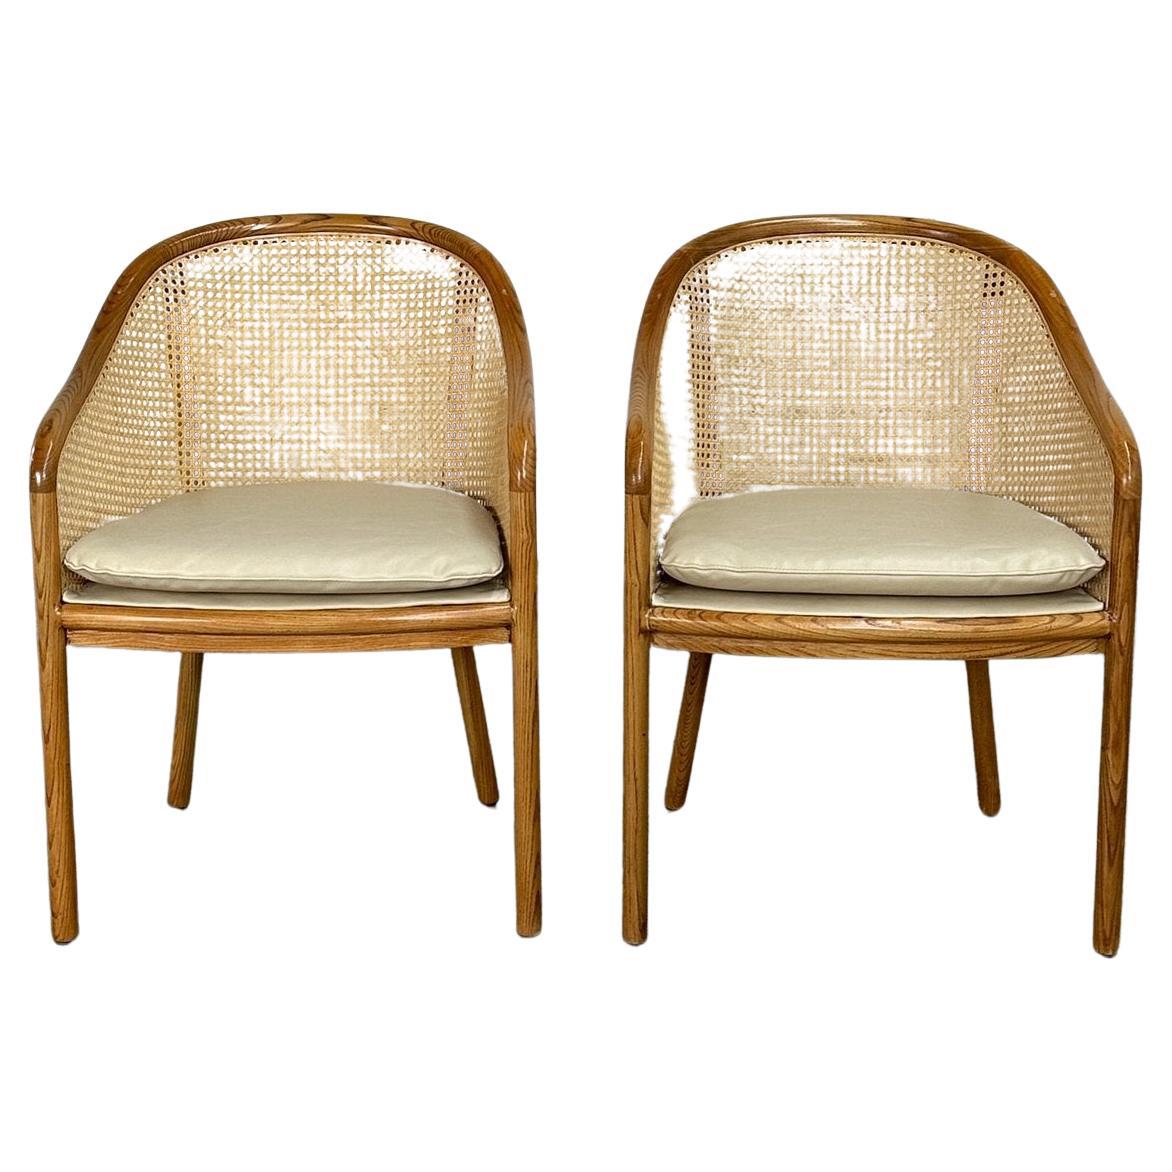 Cane side chairs by Ward Bennet -pair